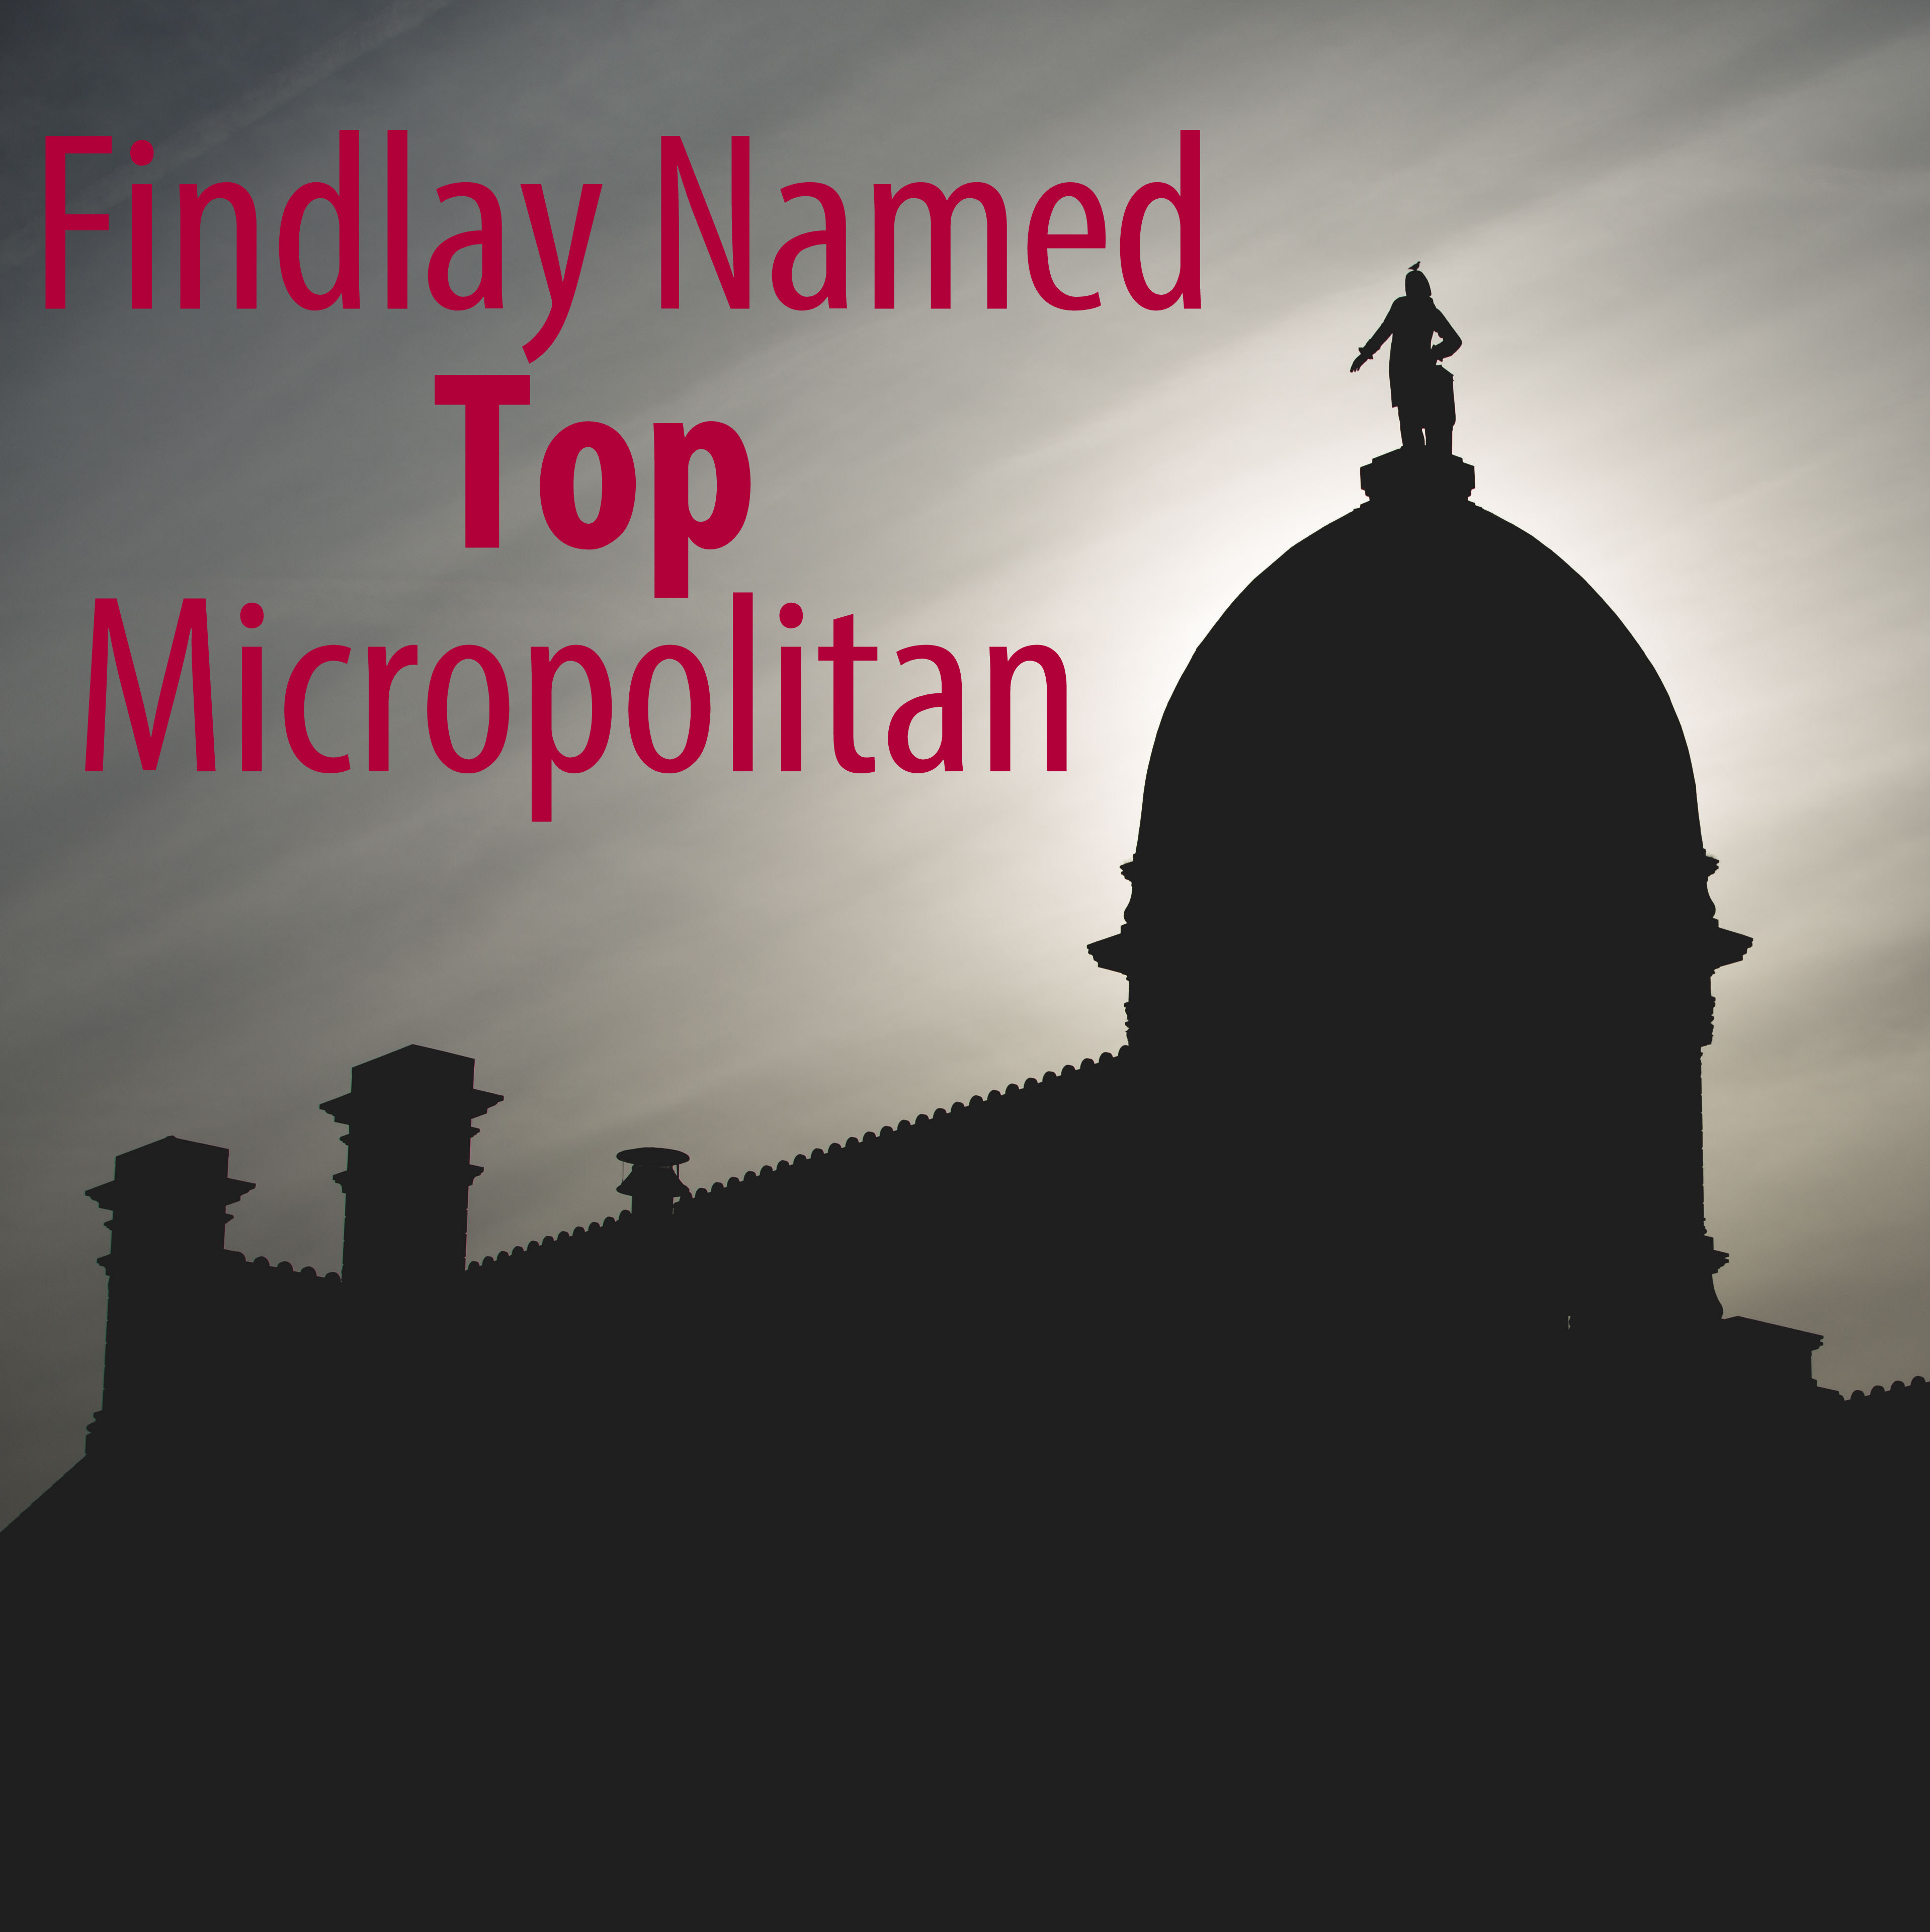 Findlay was once again named Top Mircropolitan Community by Site Selection magazine, only the second community to repeat for the third time! • VisitFindlay.com